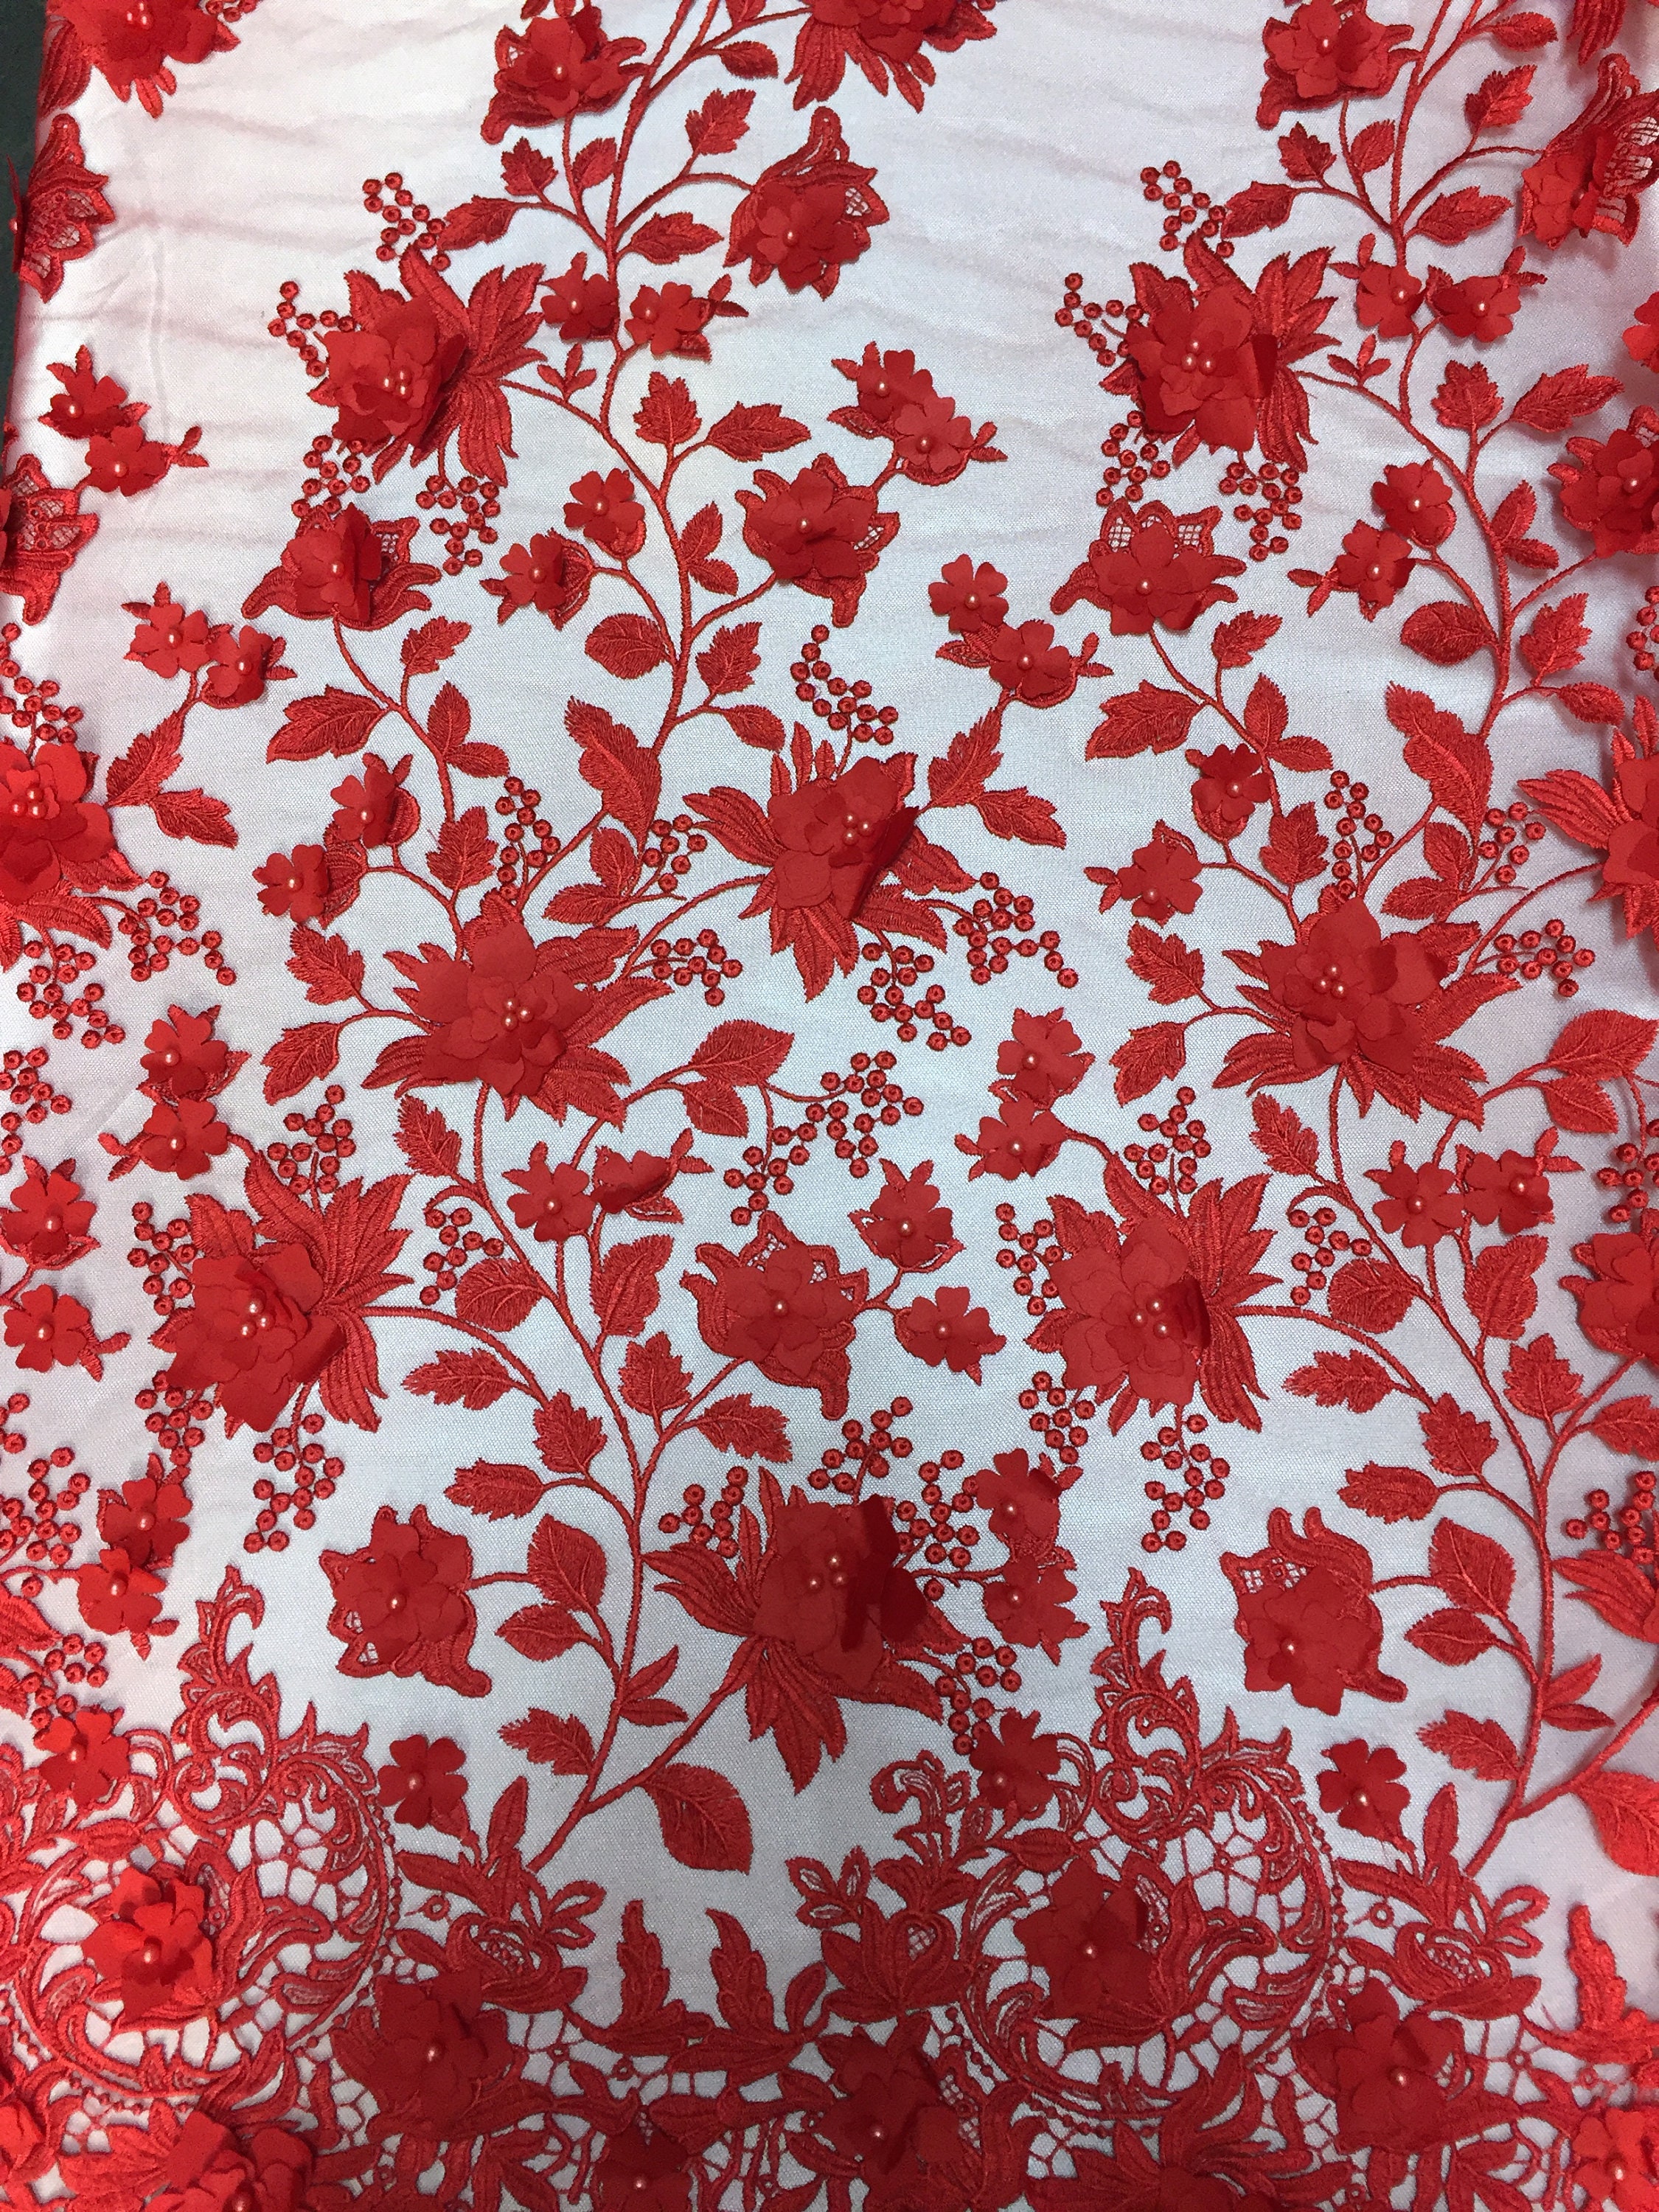 Heavy Duty Sequins Pearl Fabric - Red - Heavy Handmade Embroidery Lace